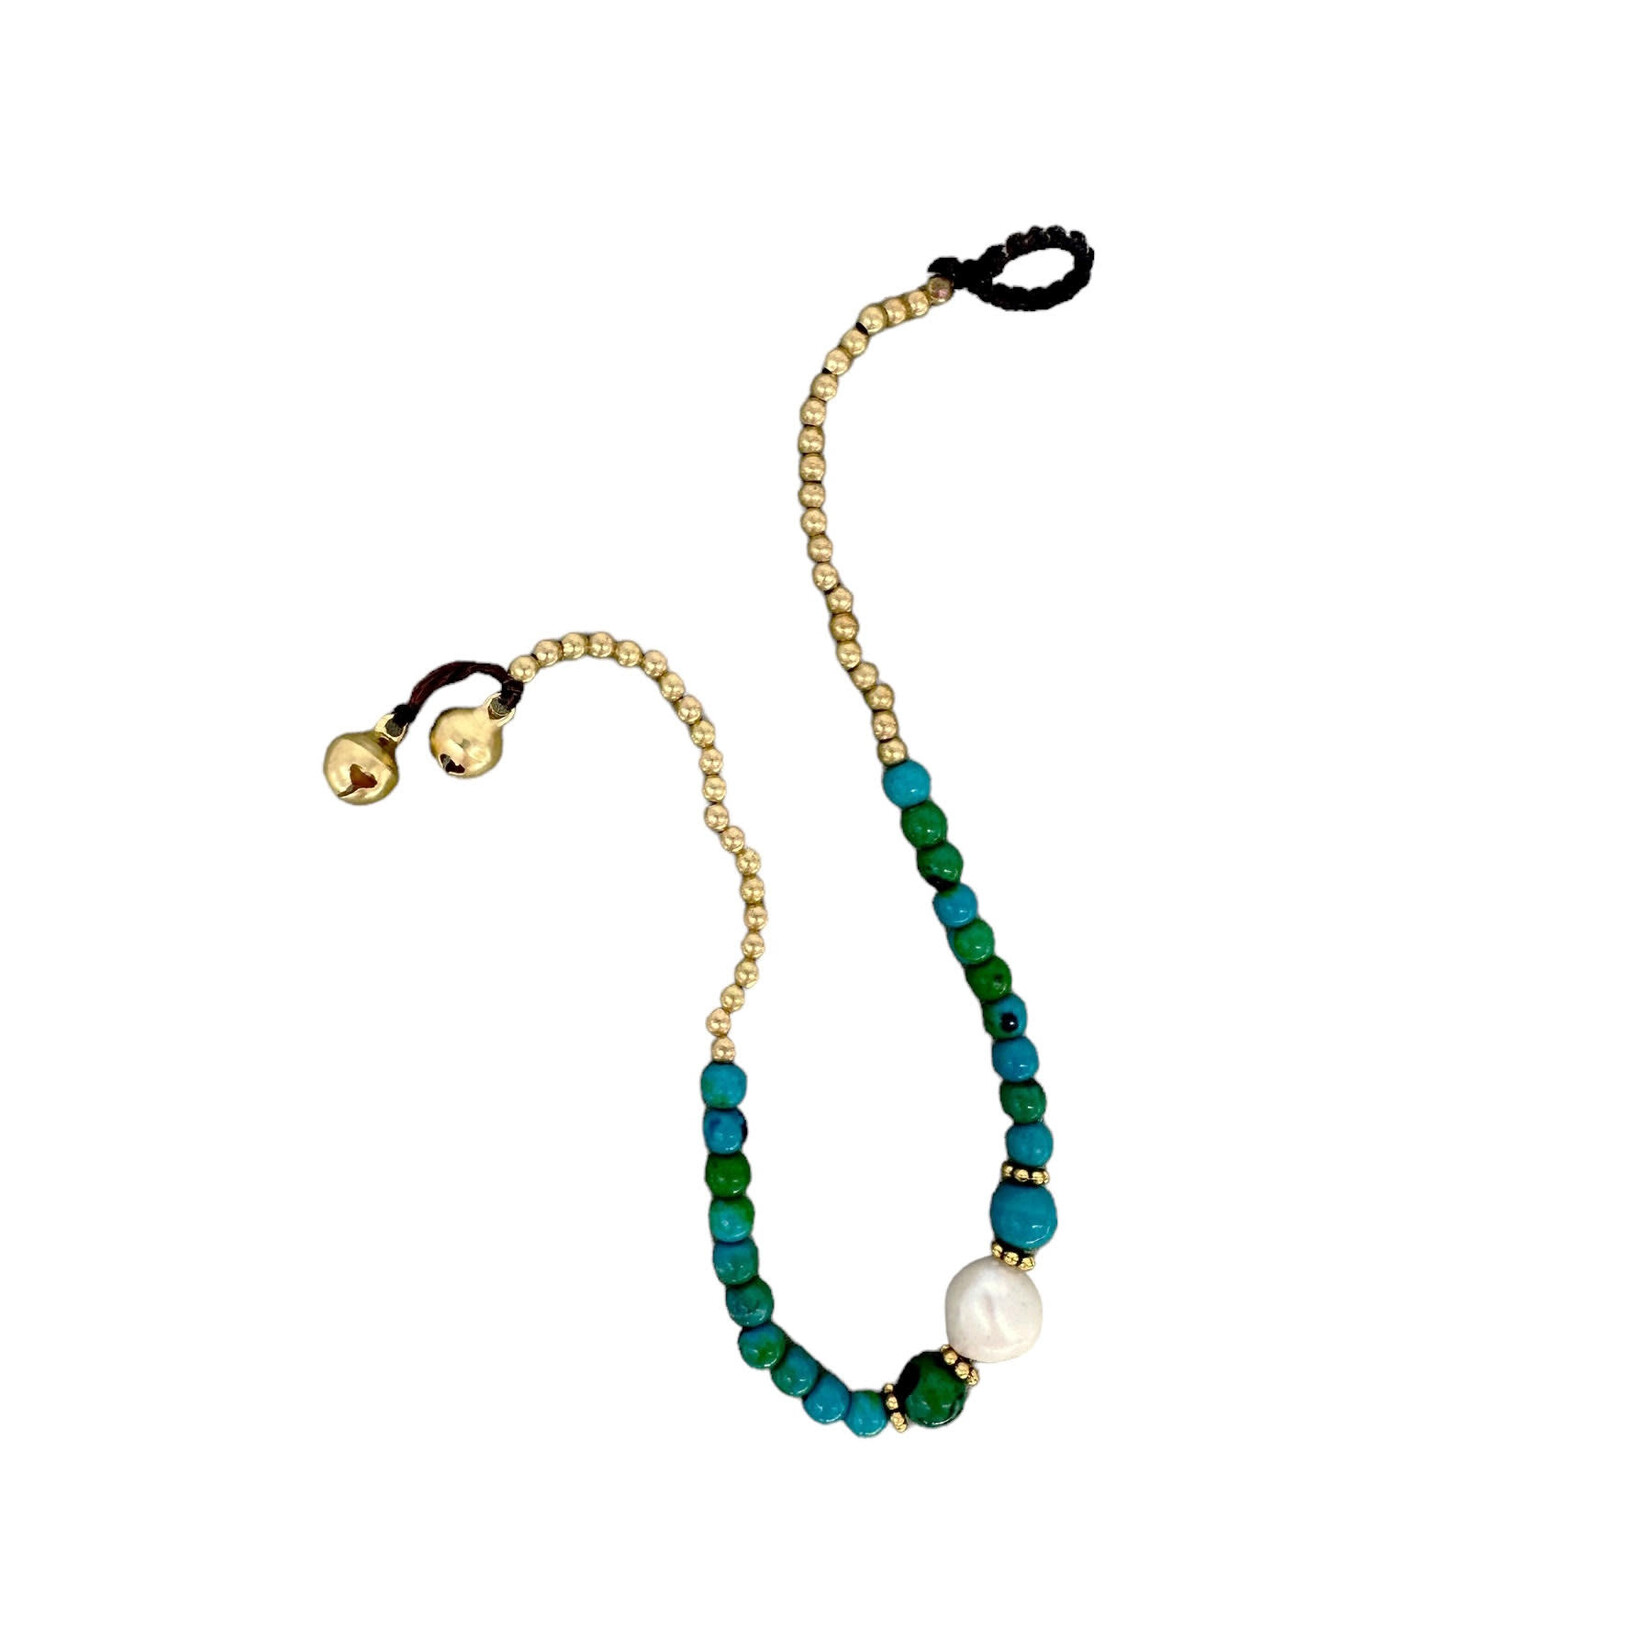 Pearl, Chrysocolla Gemstone and Brass Bead Anklet BA11